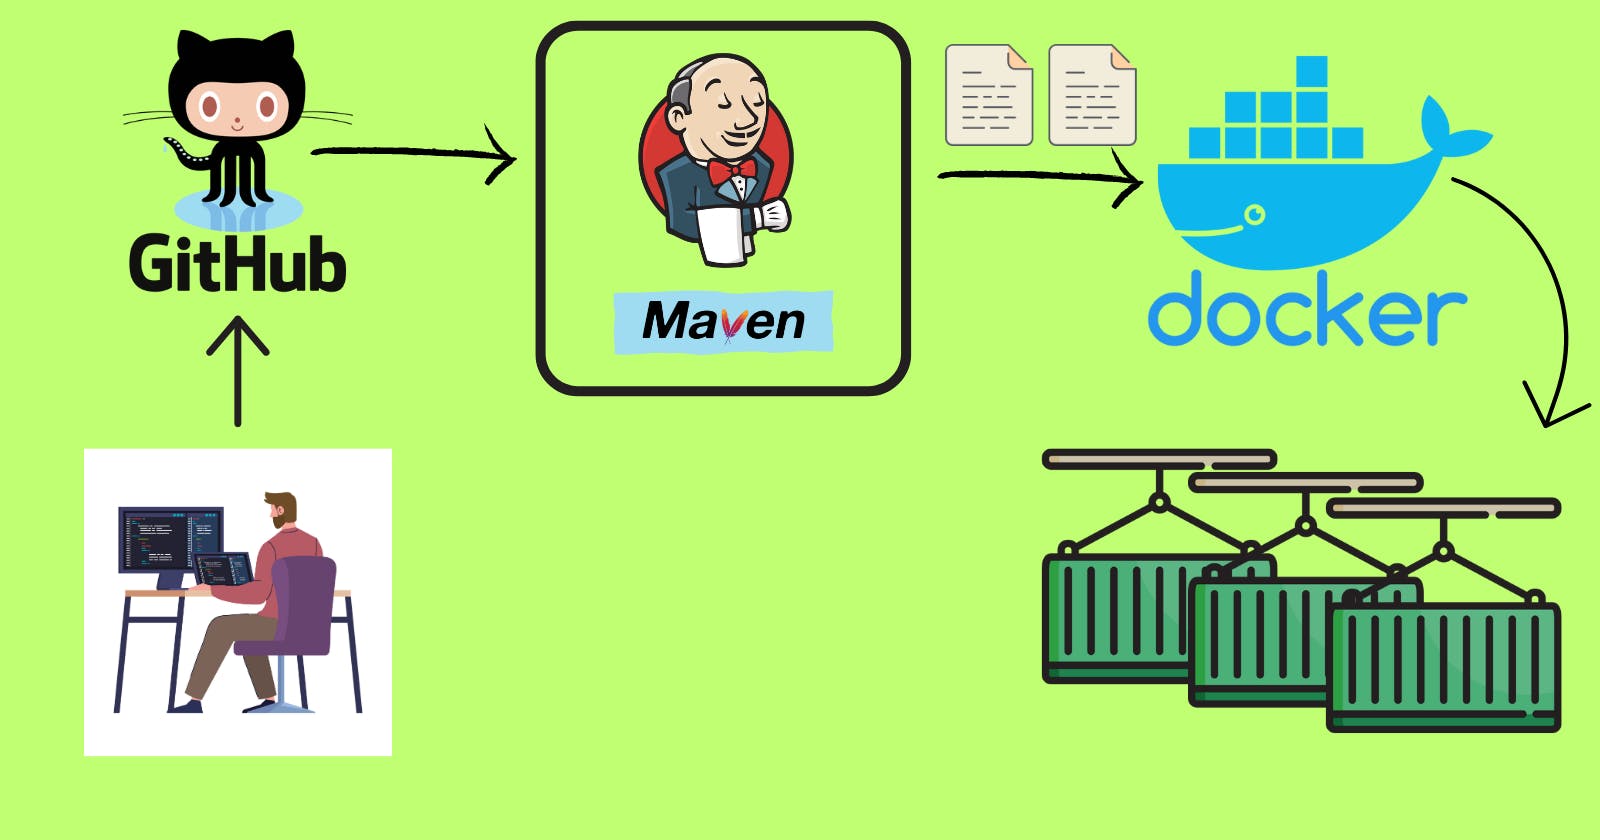 Day 3 CI/CD: Utilize Jenkins and Docker to Deploy Your App